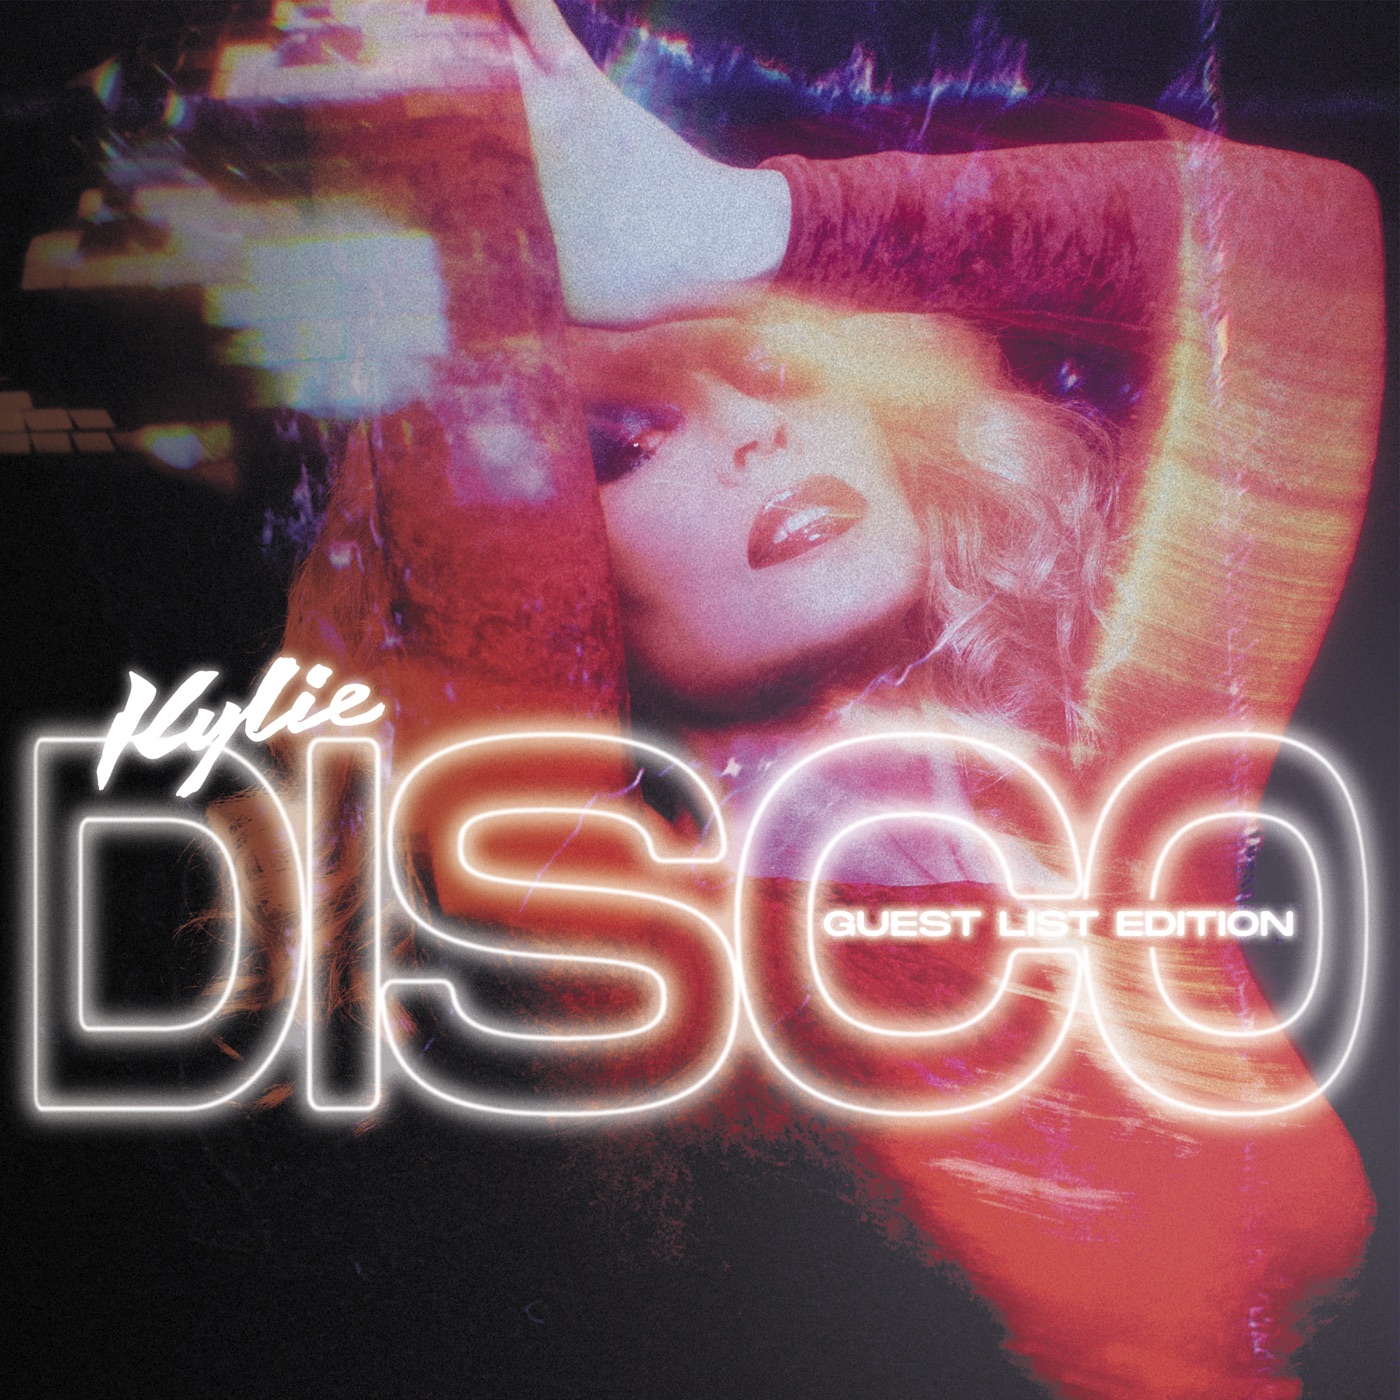 DISCO: Guest List Edition by Kylie Minogue